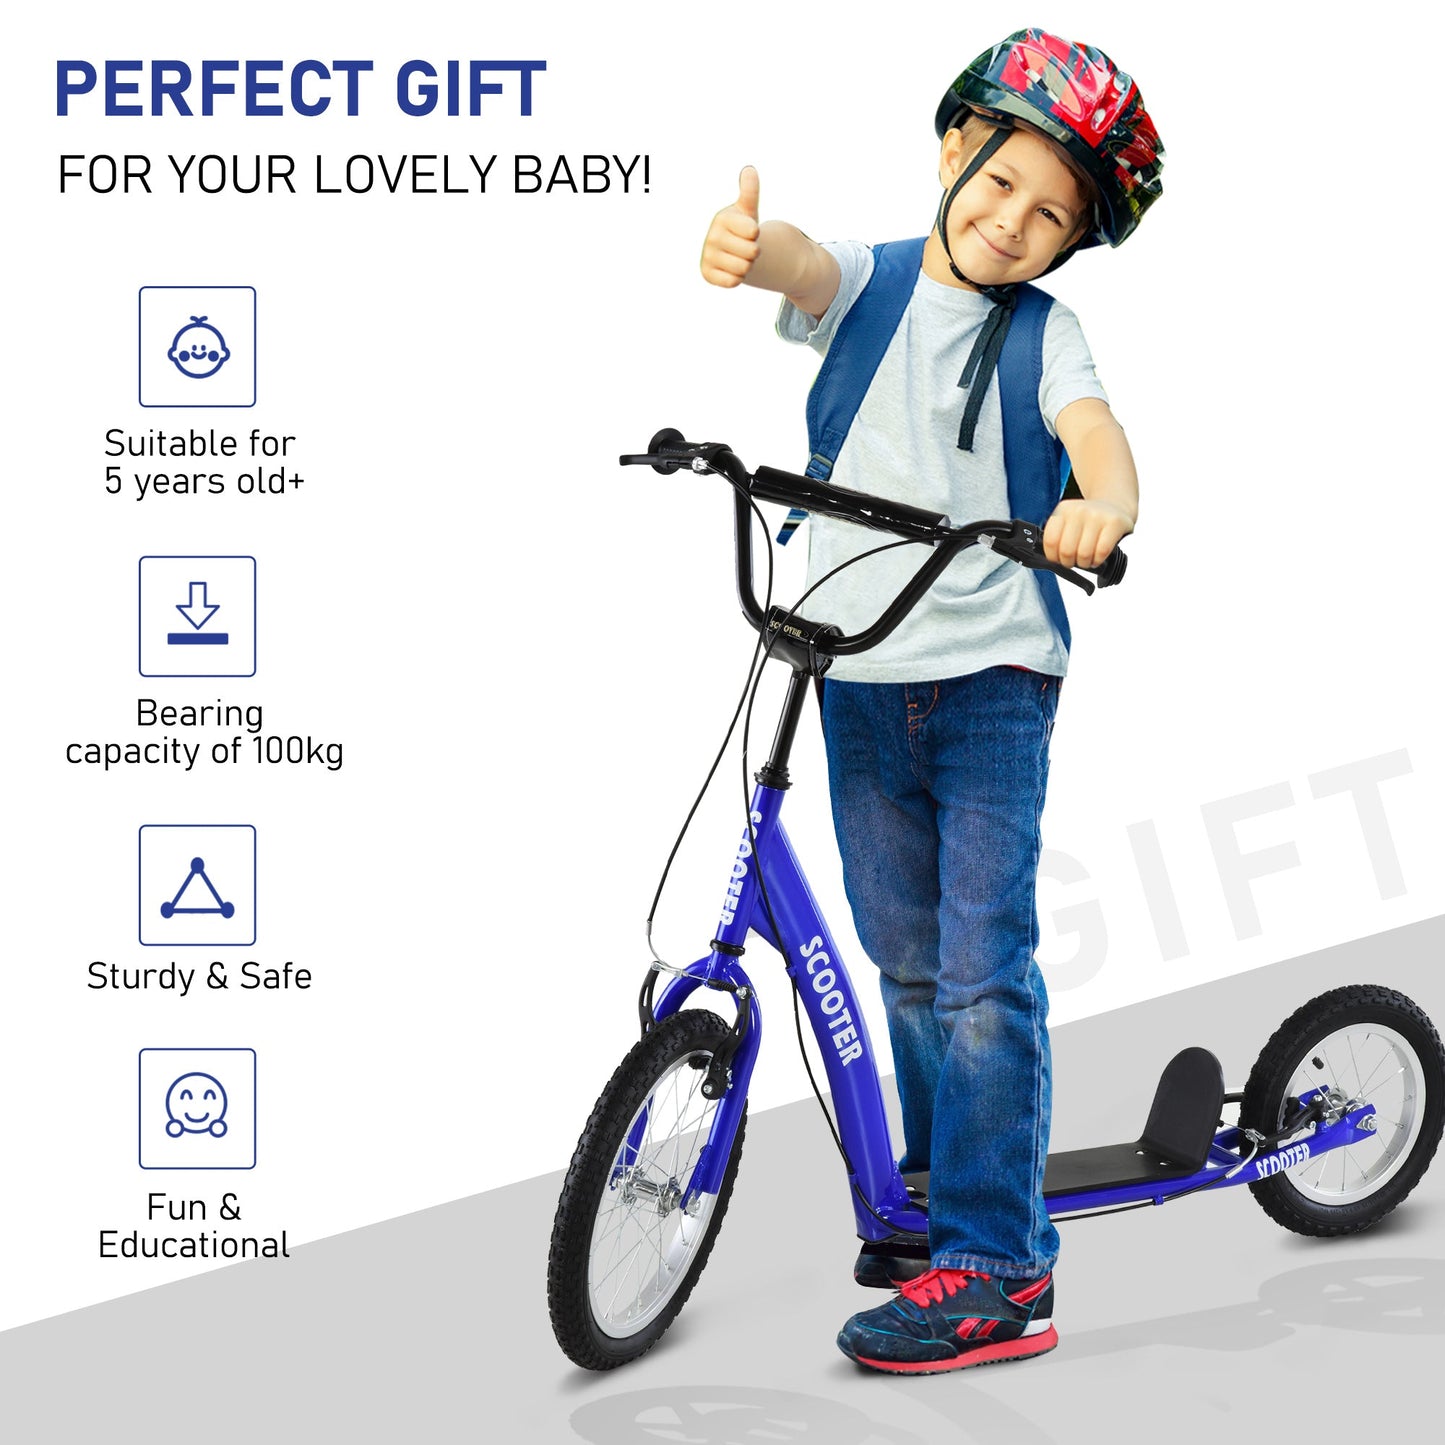 -Aosom Kick Scooter, Kids Ride On Toys for 5+ with Adjustable Handlebar, Front and Rear Dual Brakes & Inflatable Wheels, Blue - Outdoor Style Company